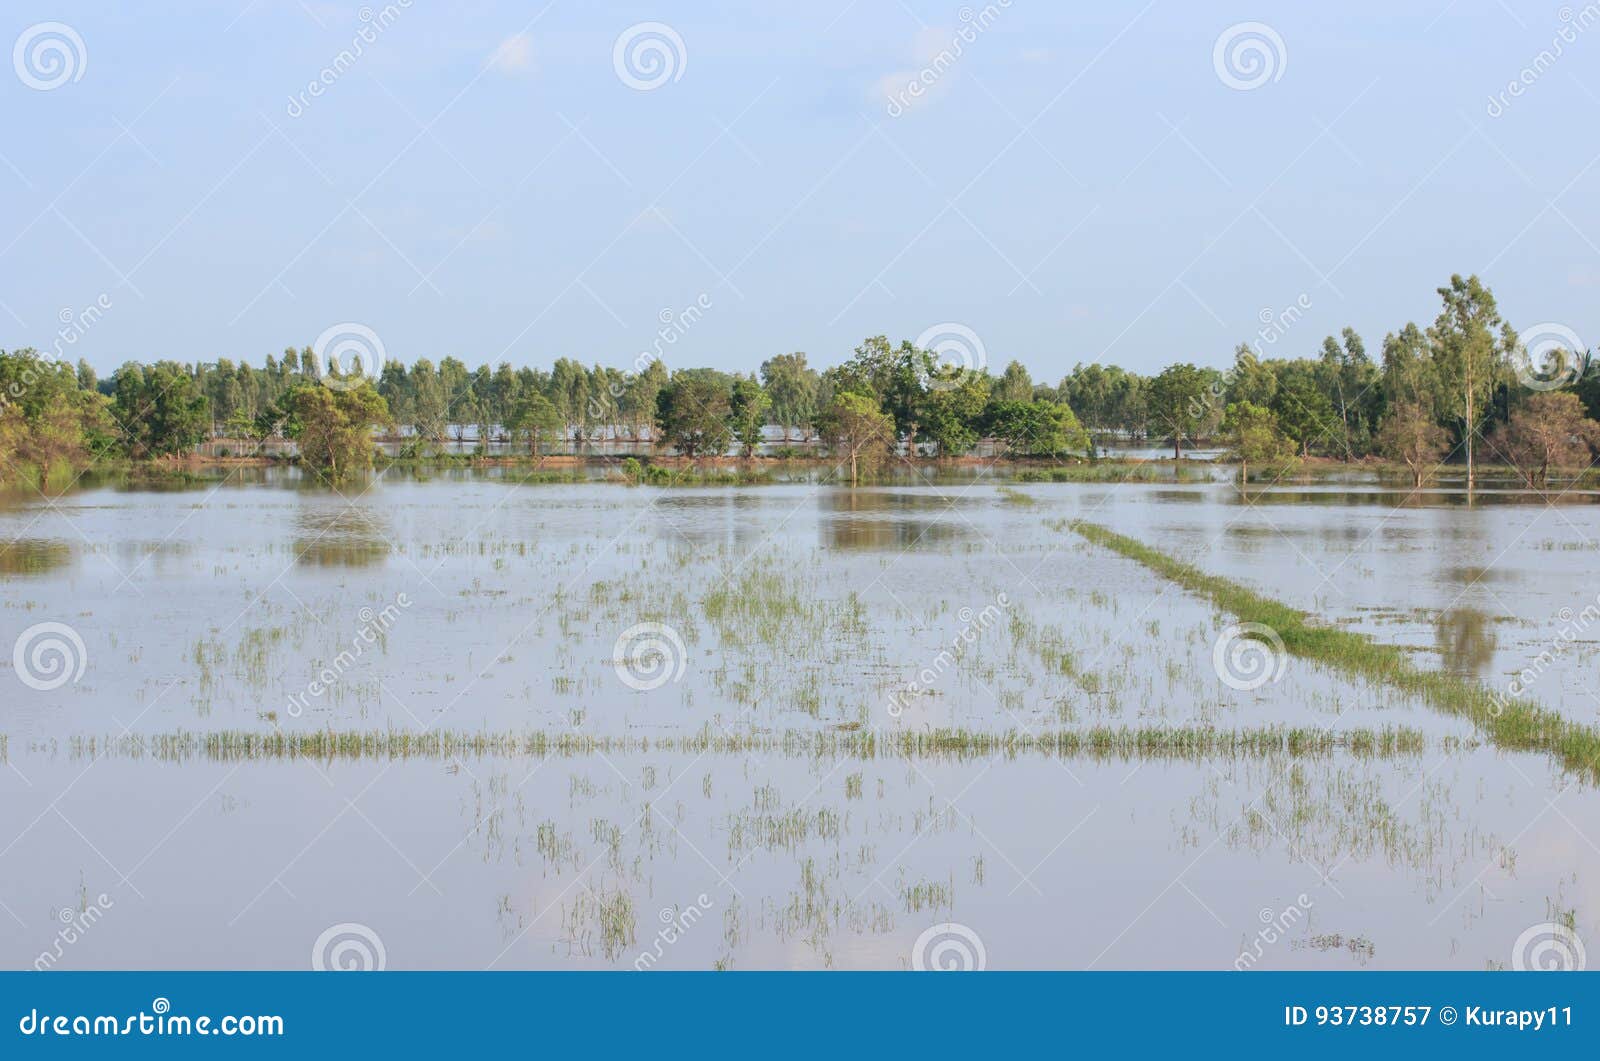 rice paddies are flooded with water